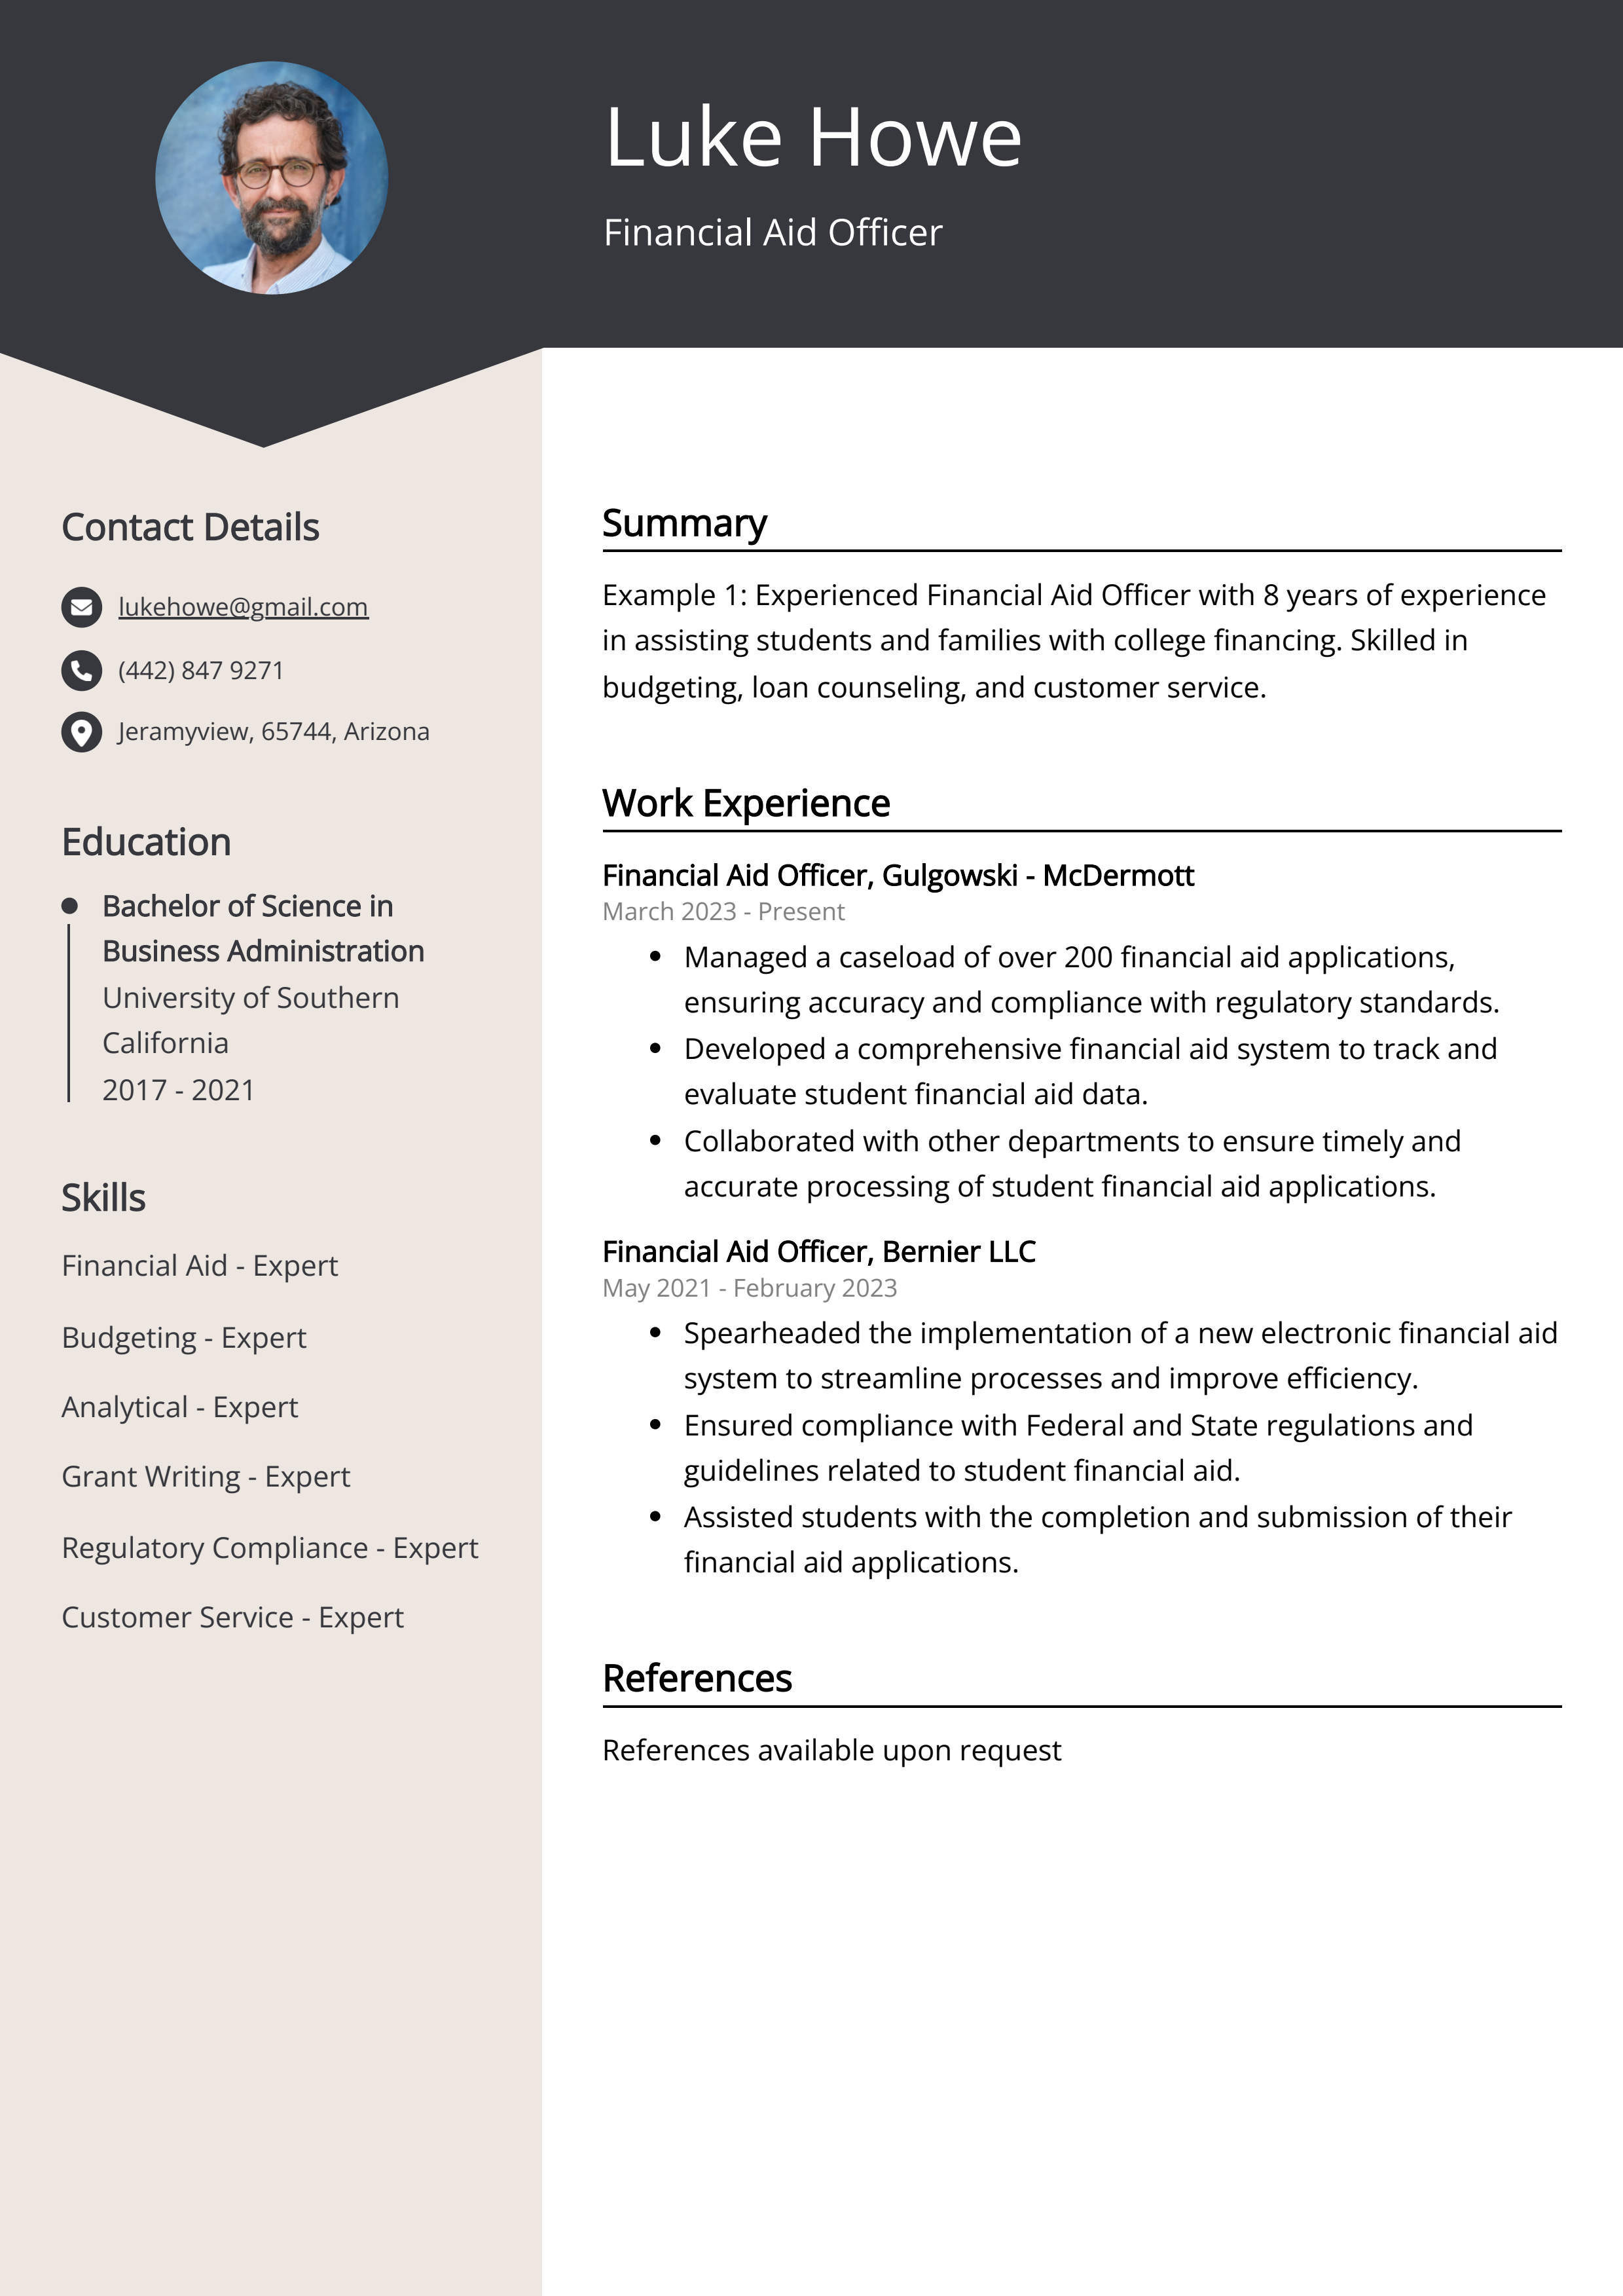 Financial Aid Officer CV Example